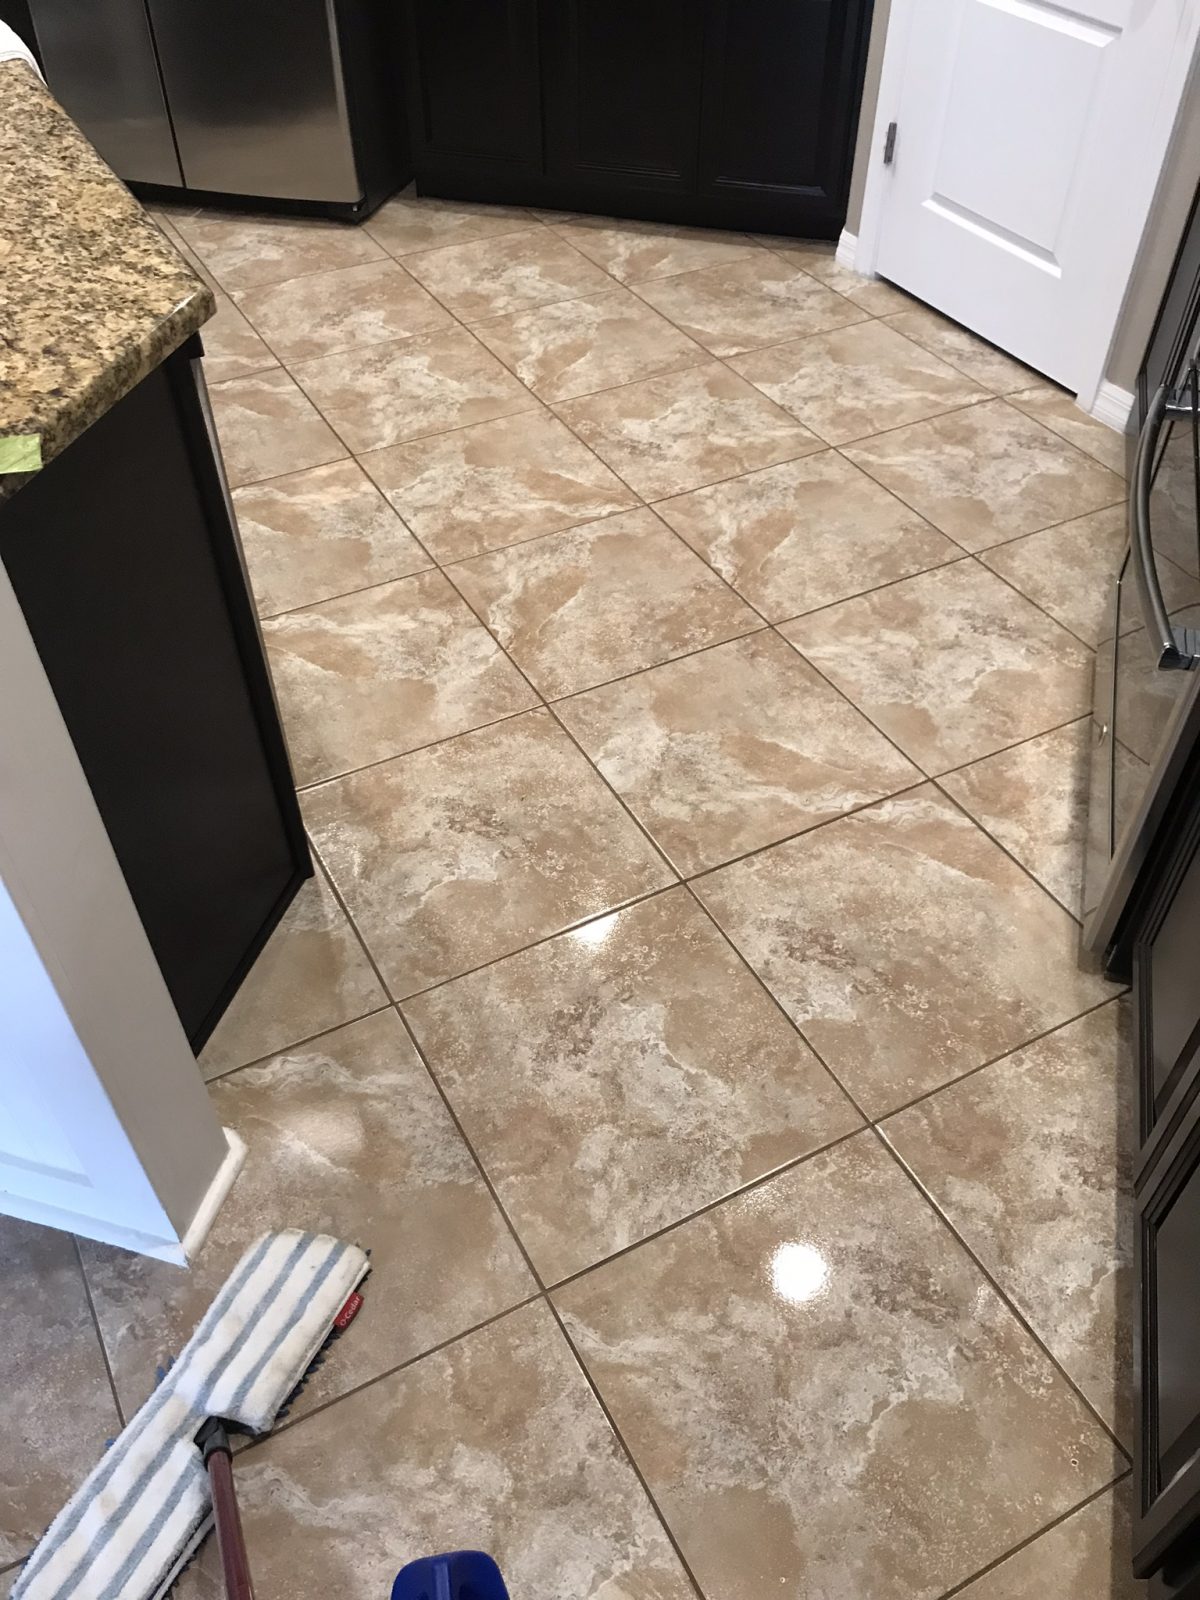 Professional Tile & Grout Cleaning Clearwater Florida by Howards Cleaning Service